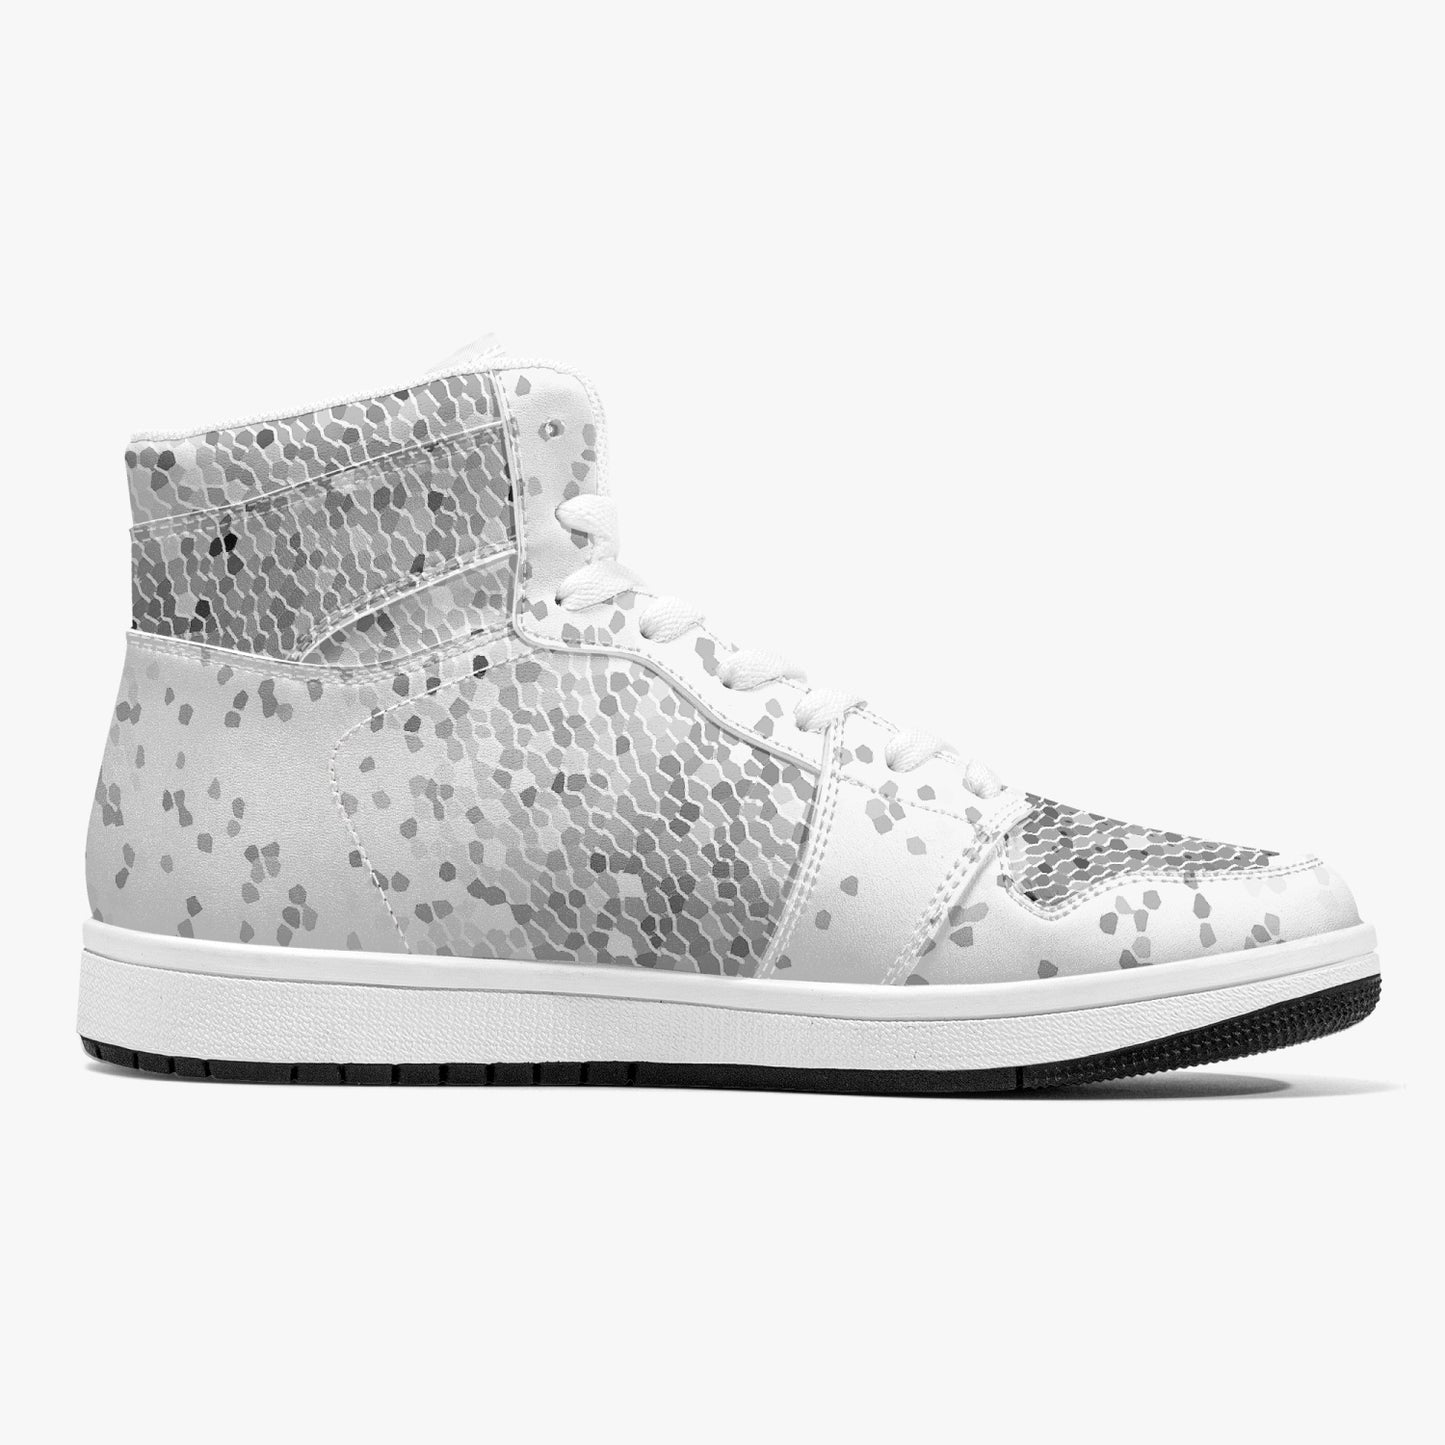 Almost White - Macr.in (High-Top Leather Sneakers)